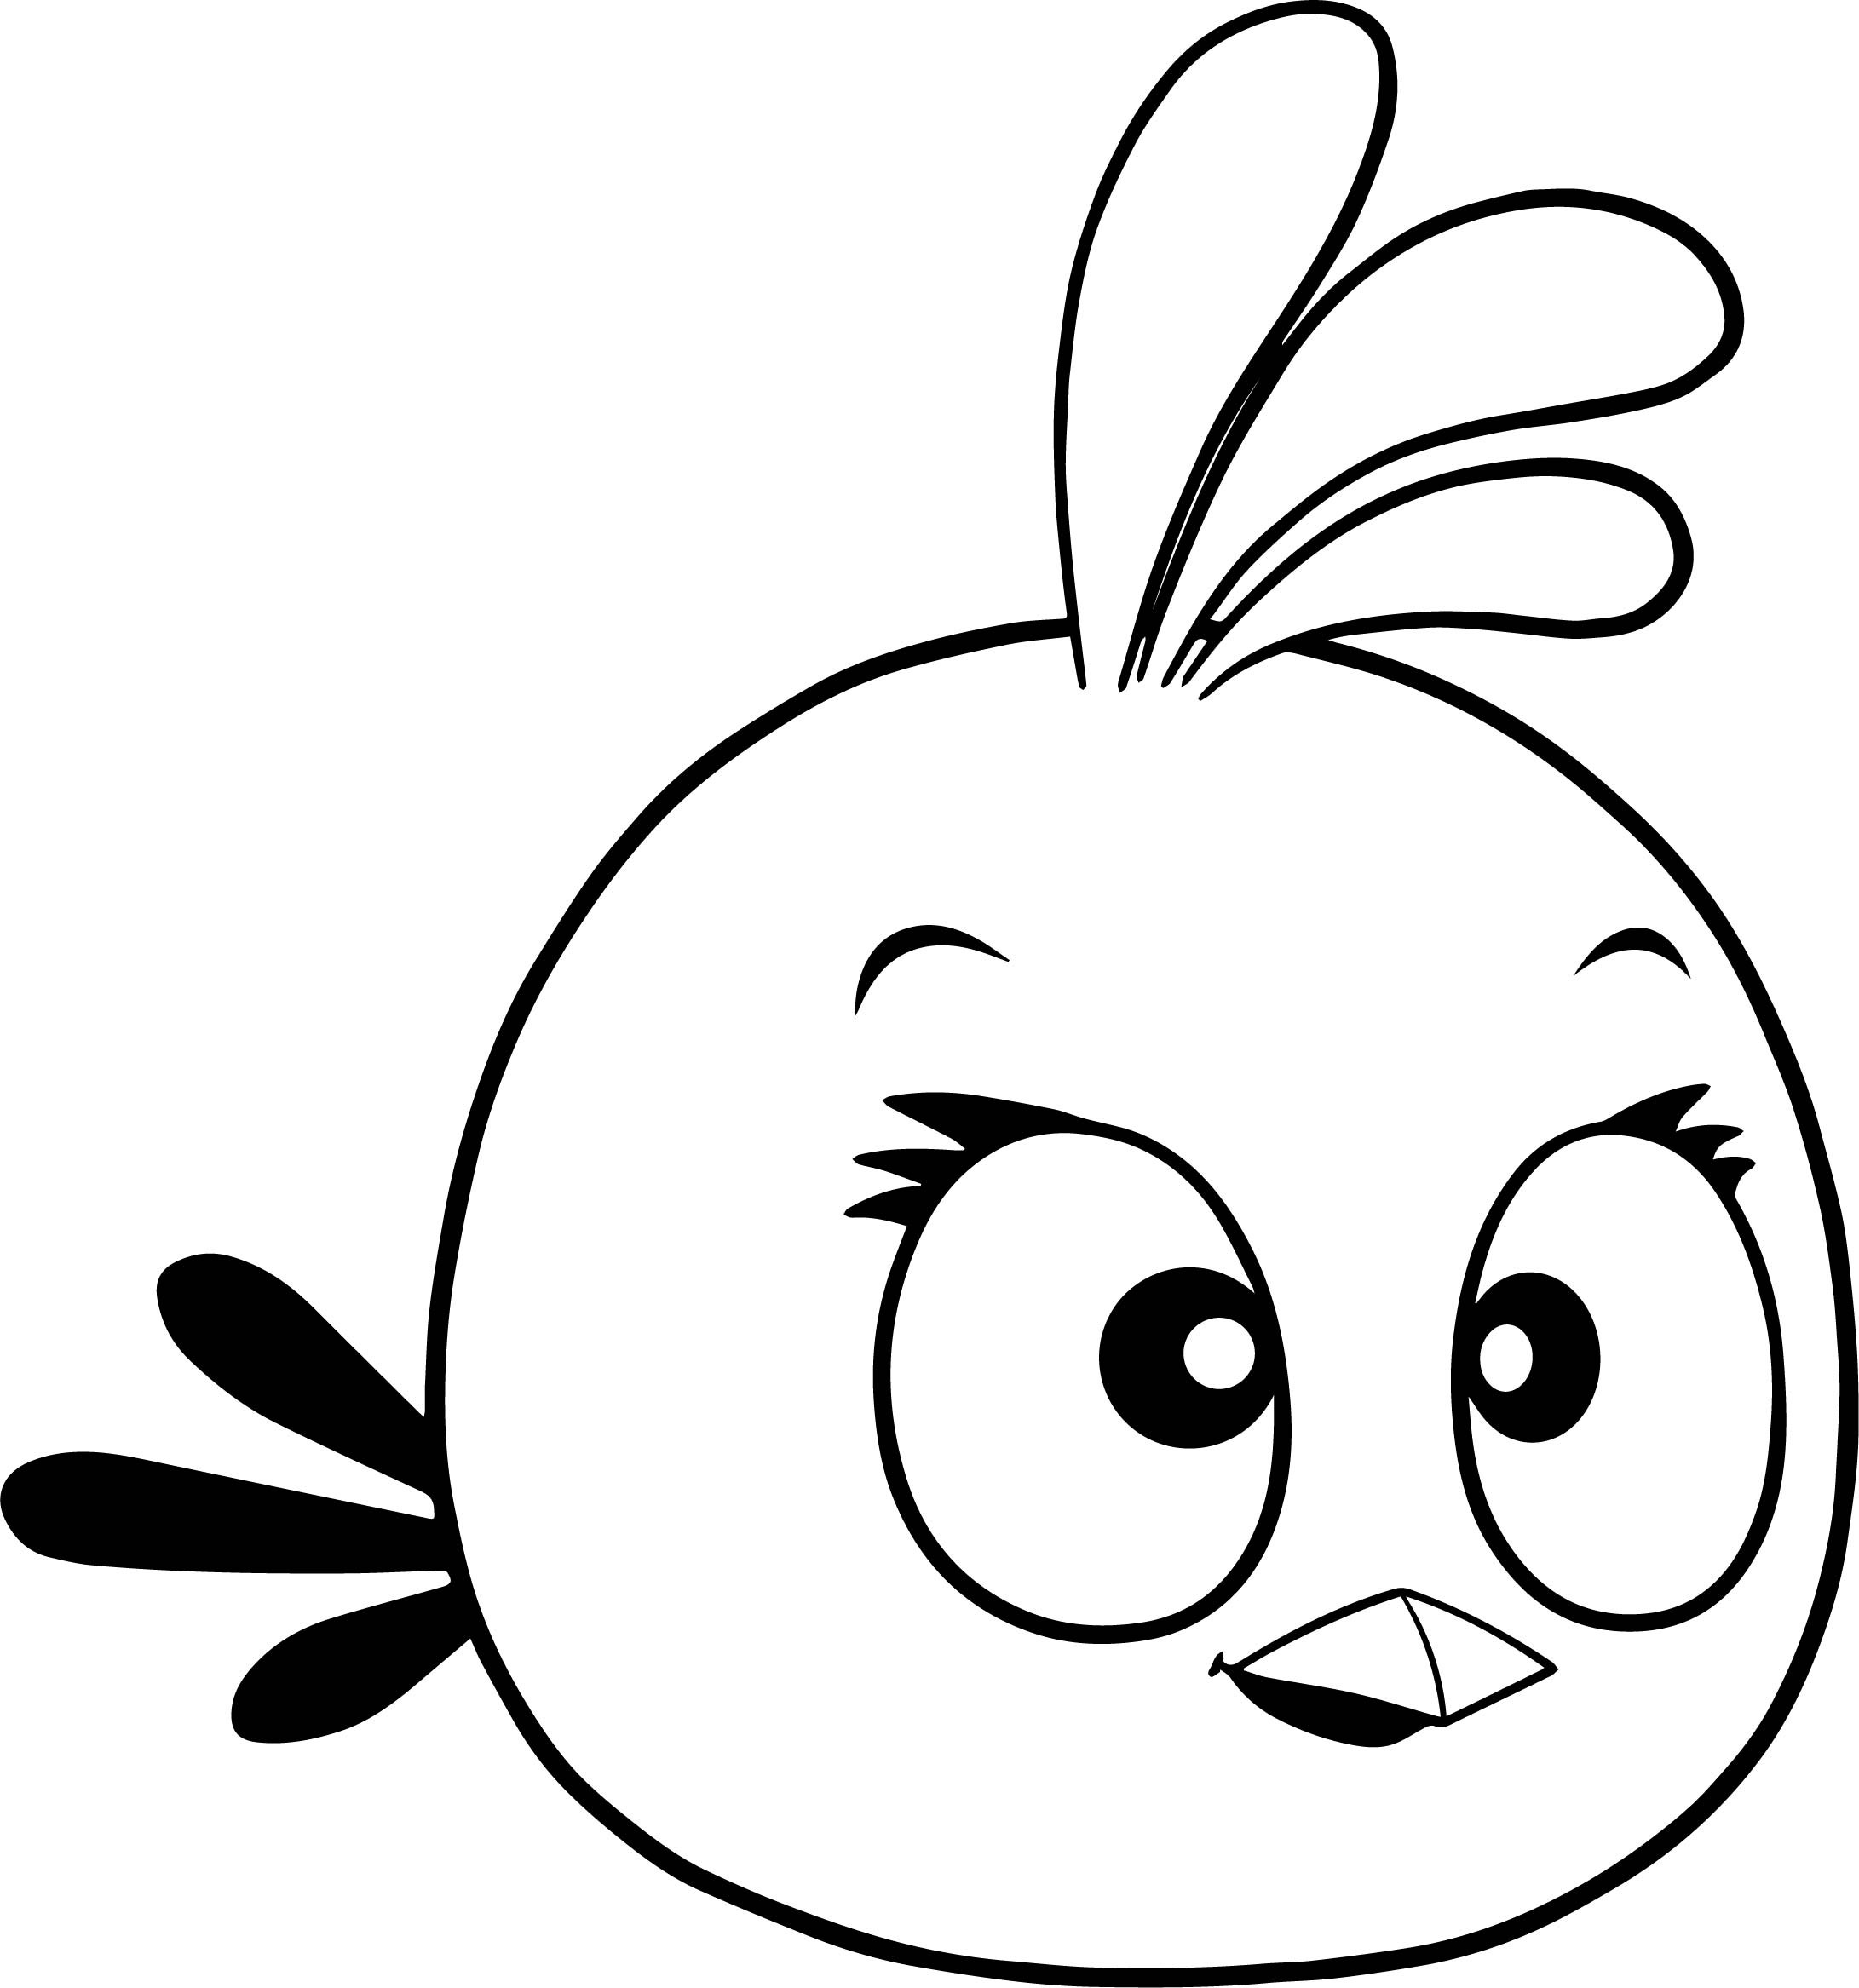 Girl Angry Birds Coloring Pages
 Pink Girl Angry Bird Coloring Page